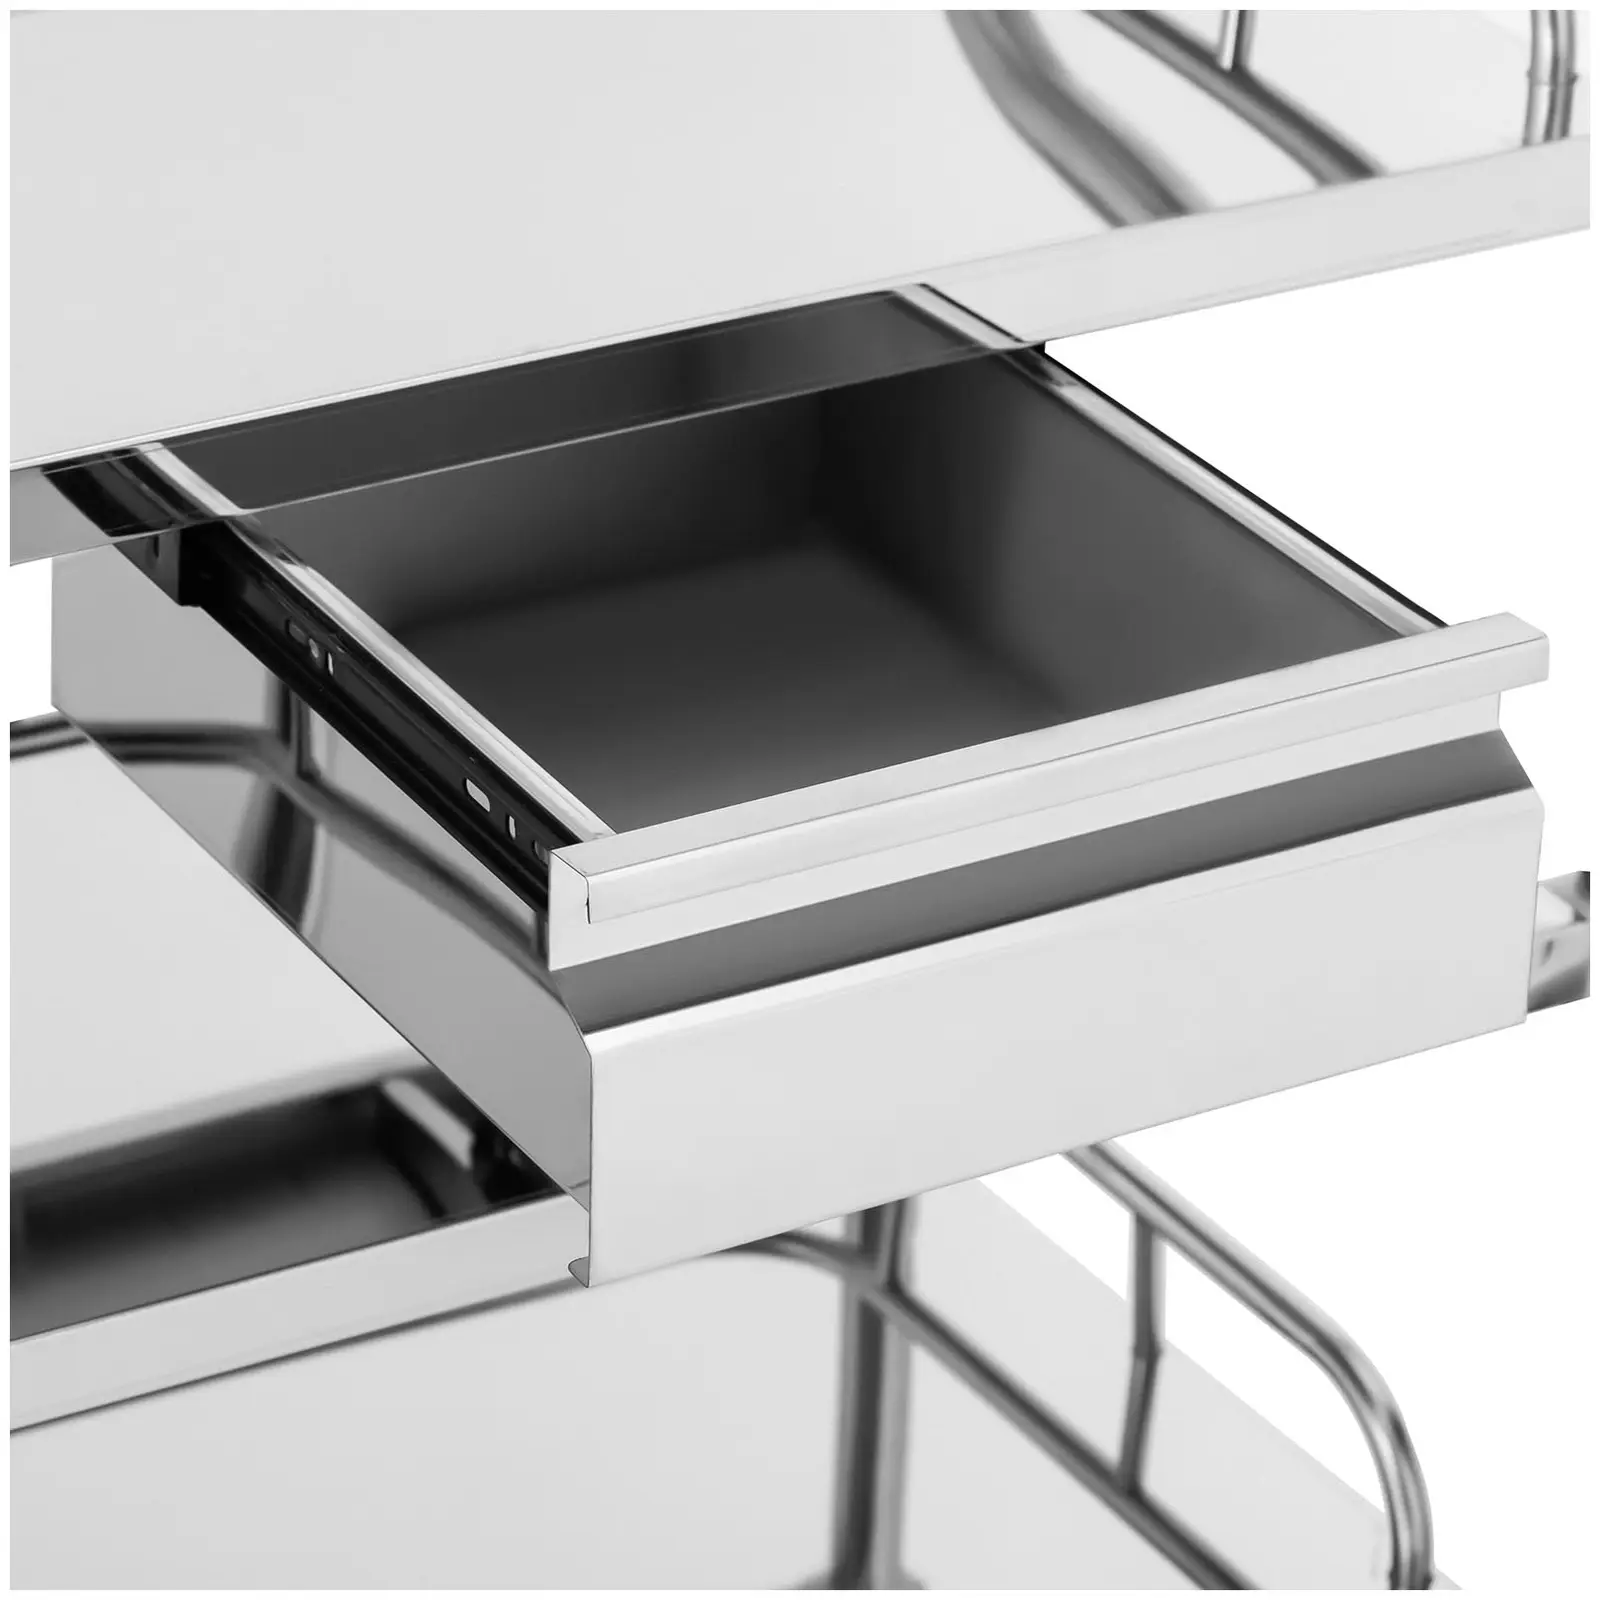 Laboratory Trolley - stainless steel - 3 shelves each 56 x 36 x 13 cm - 1 drawer - 15 kg